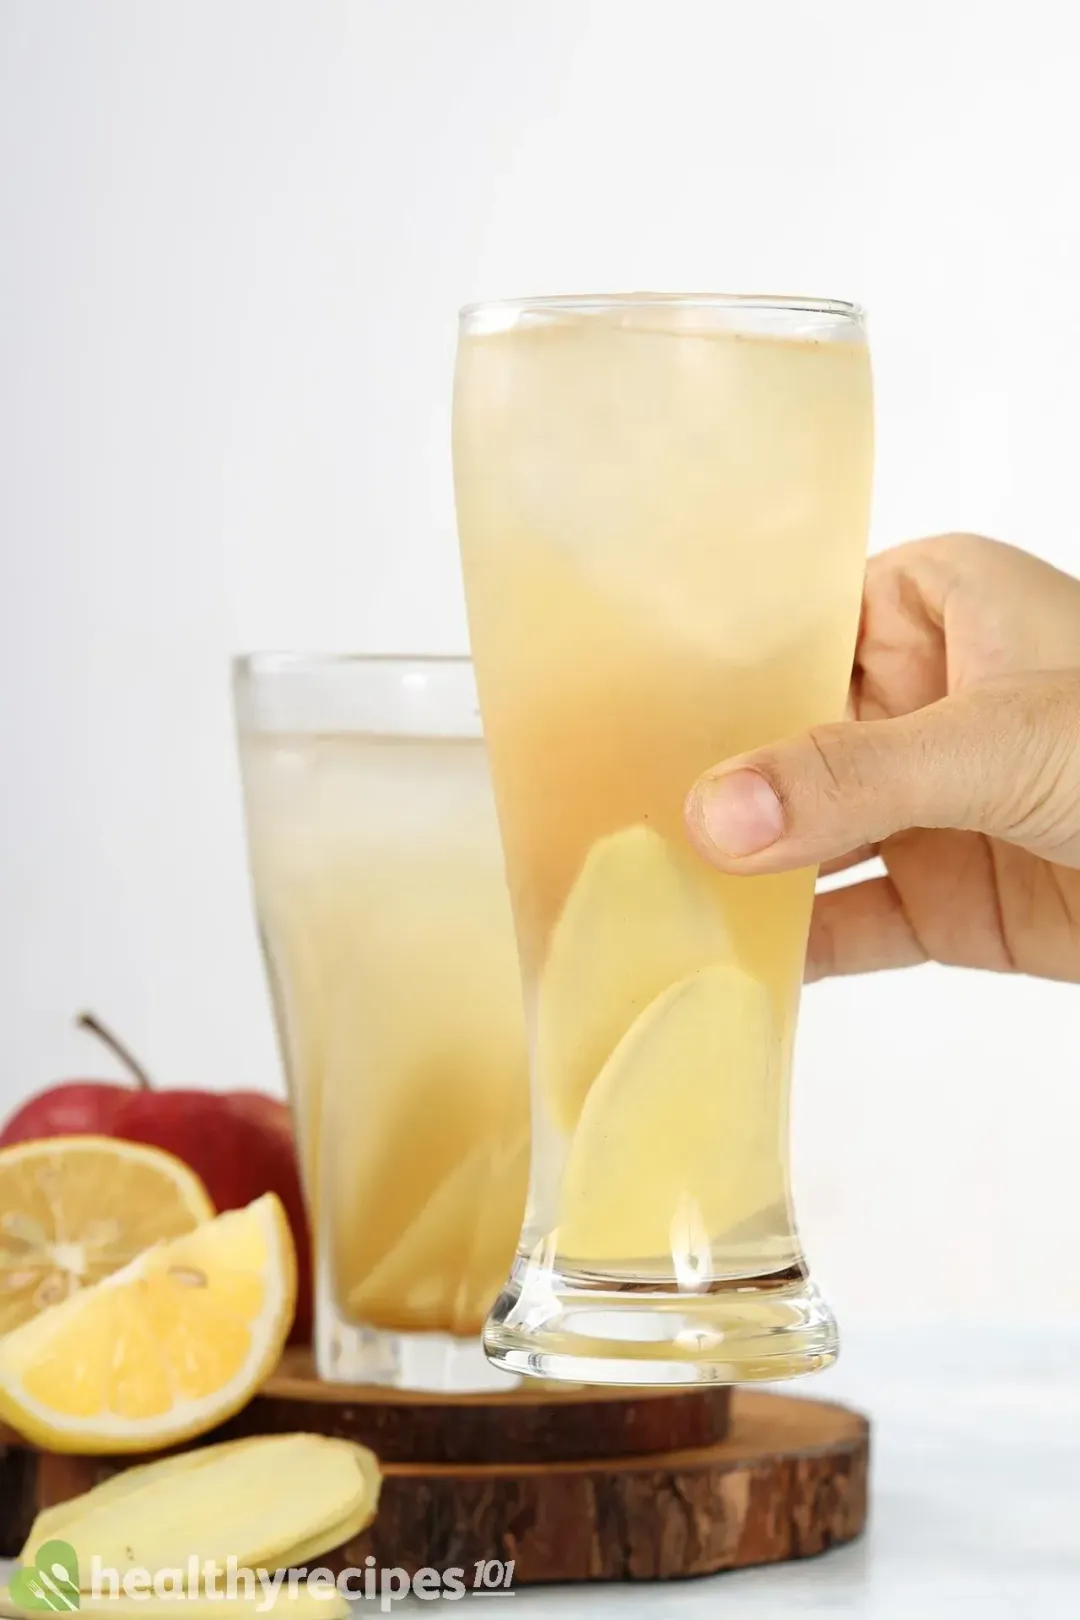 A hand putting a glass of apple cider vinegar drink next to another glass of the same drink